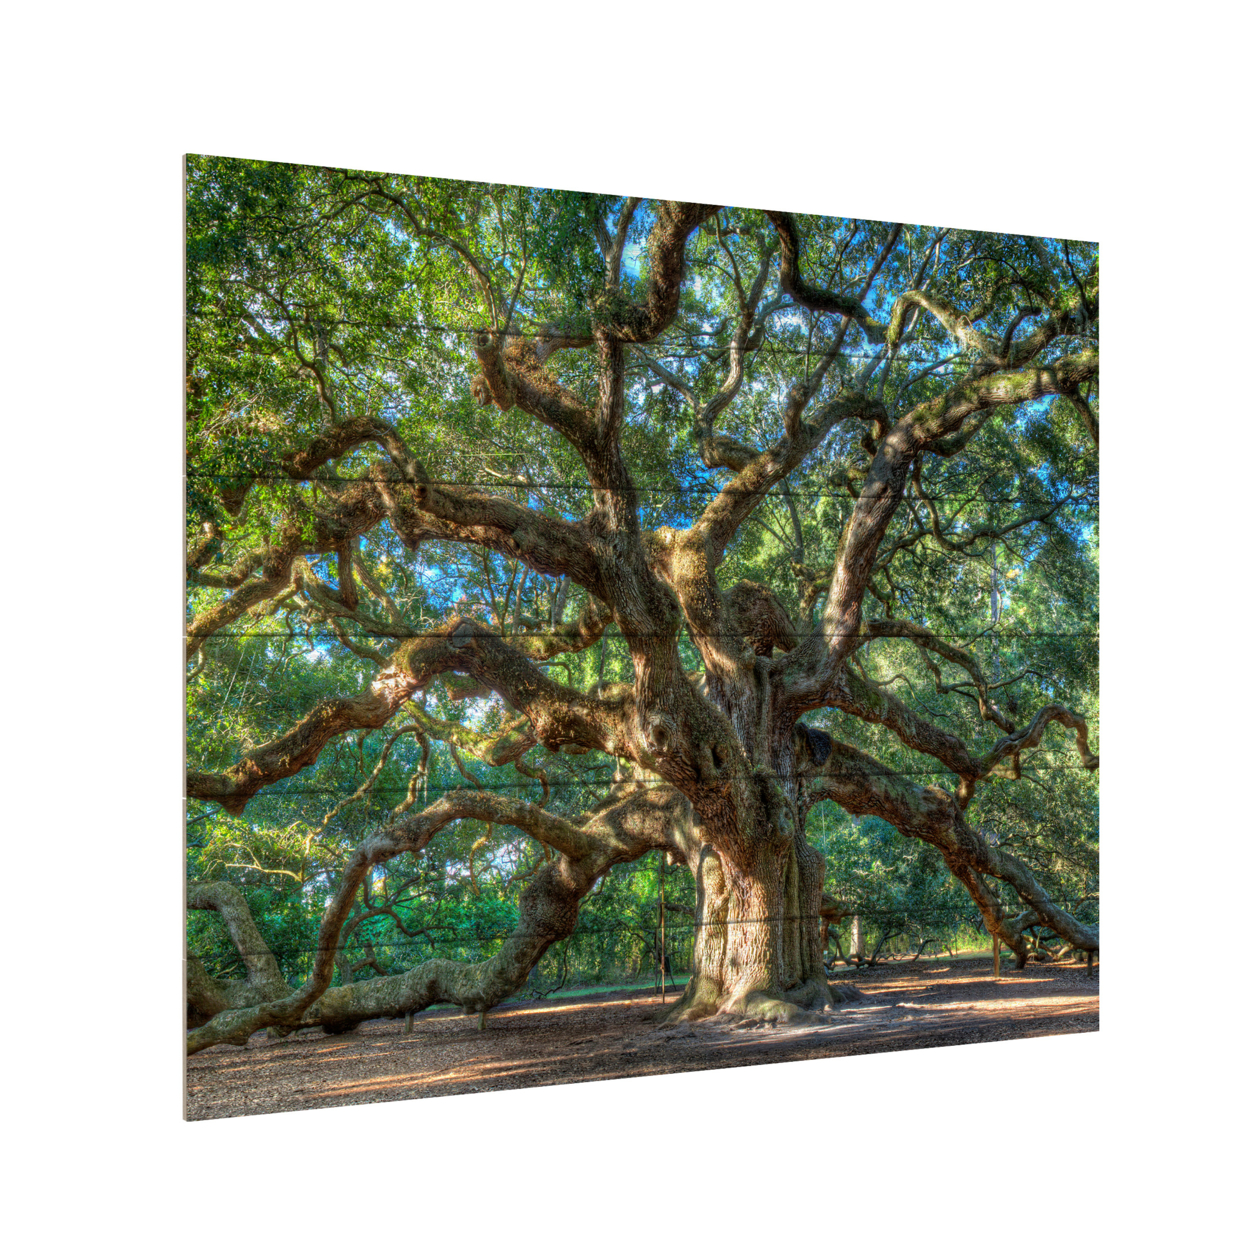 Wooden Slat Art 18 X 22 Inches Titled Angel Oak Charleston Ready To Hang Home Decor Picture